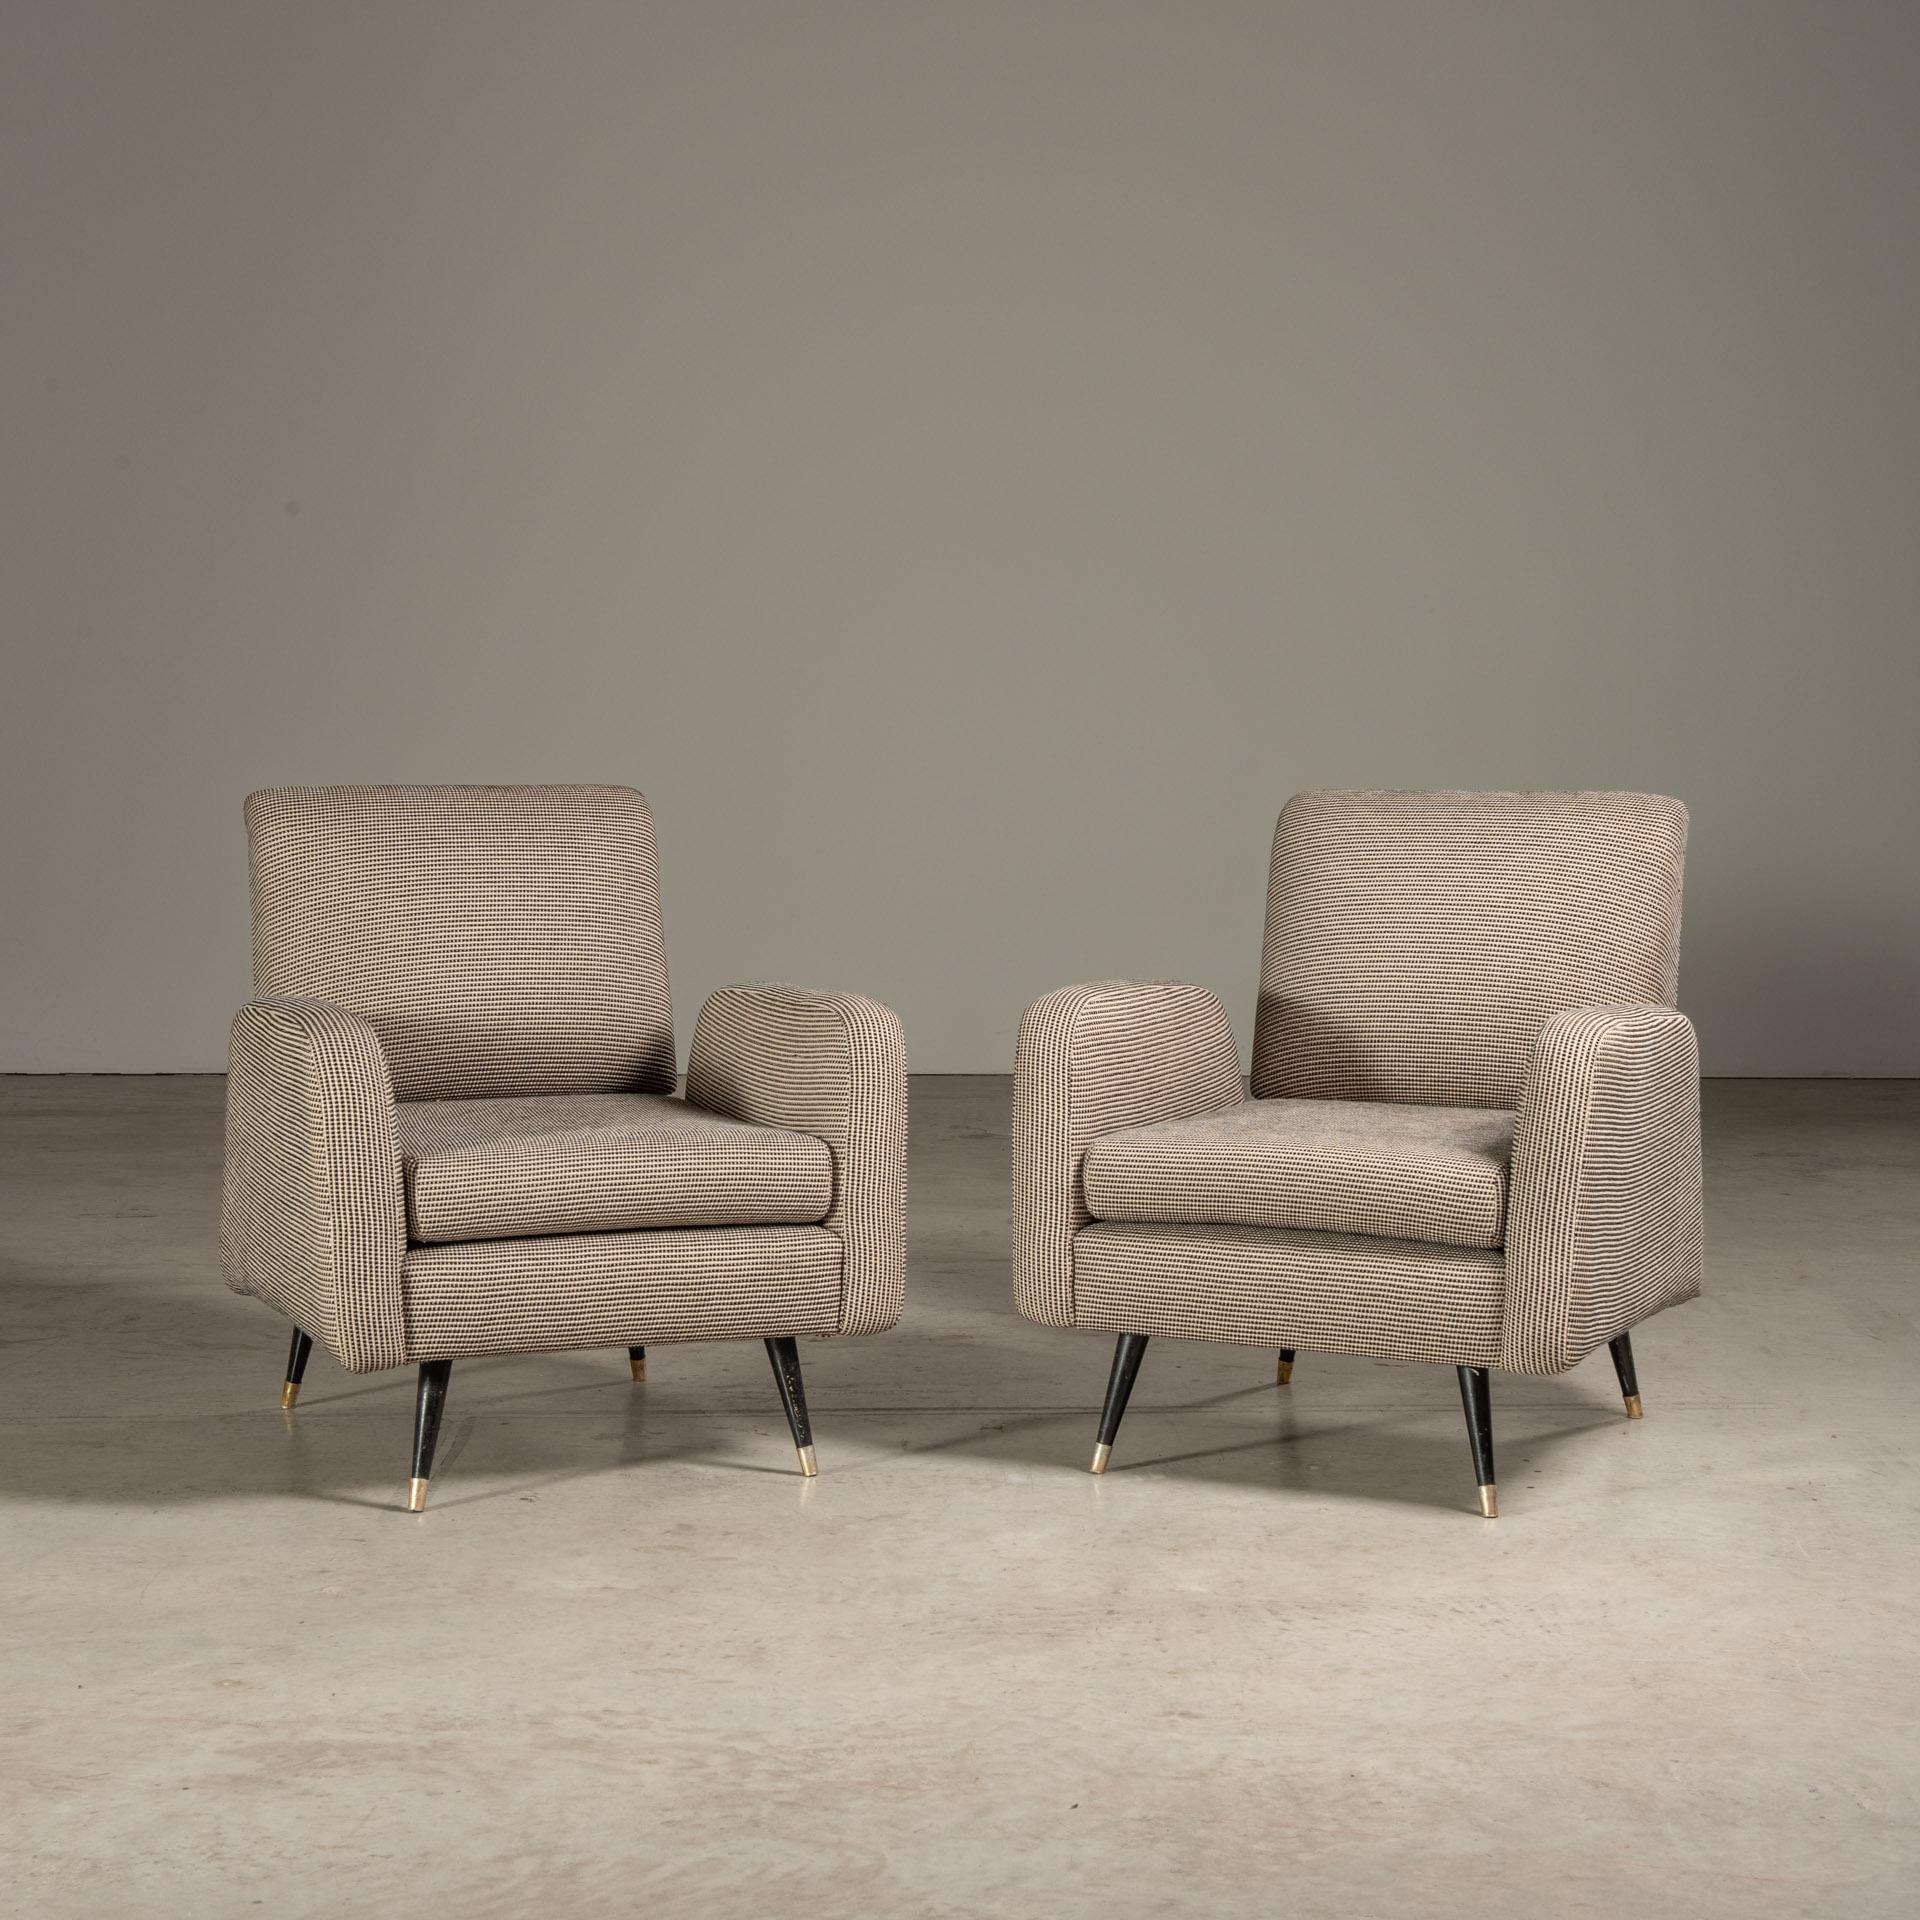 This pair of lounge chairs designed by Martin Eisler showcase the mid-century modern Brazilian style with a classic yet innovative design that harmonizes form and function.

These pieces, from the 1950s or 1960s, feature a boxy yet streamlined